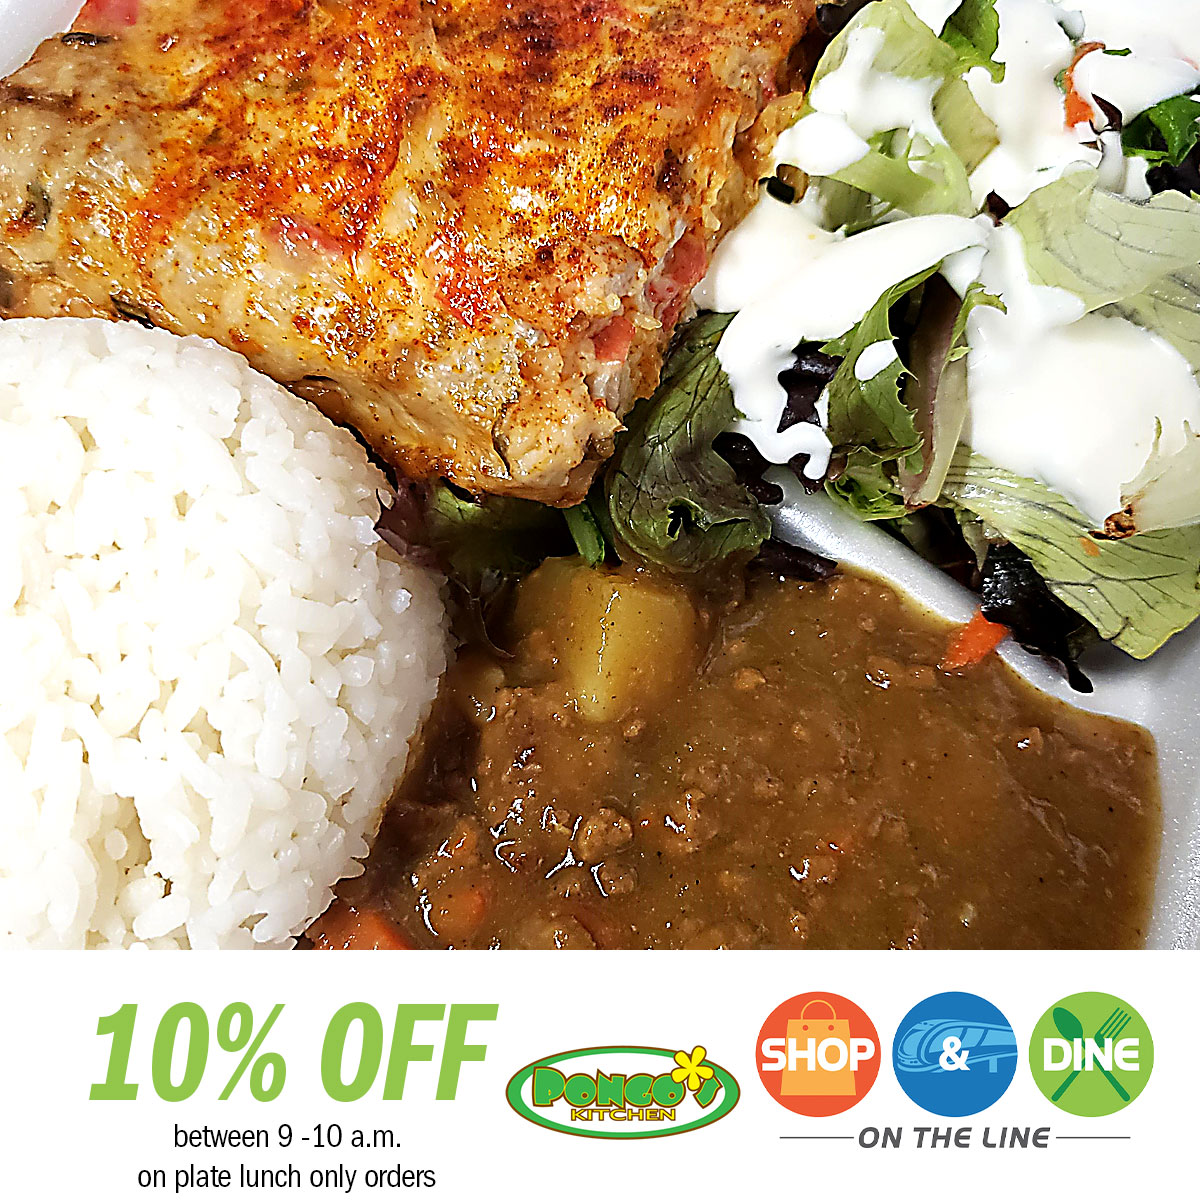 🍽️Pongo's Kitchen is offering Shop & Dine on the Line customers 10% OFF between 9 - 10 a.m. on plate lunch only orders. Must be picked up 9 - 10 a.m. Catering not included. 

Visit ShopAndDineOnTheLine.com for more deals #ShopDineHNL #ShopDineOnTheLine 

PongosKitchen.net